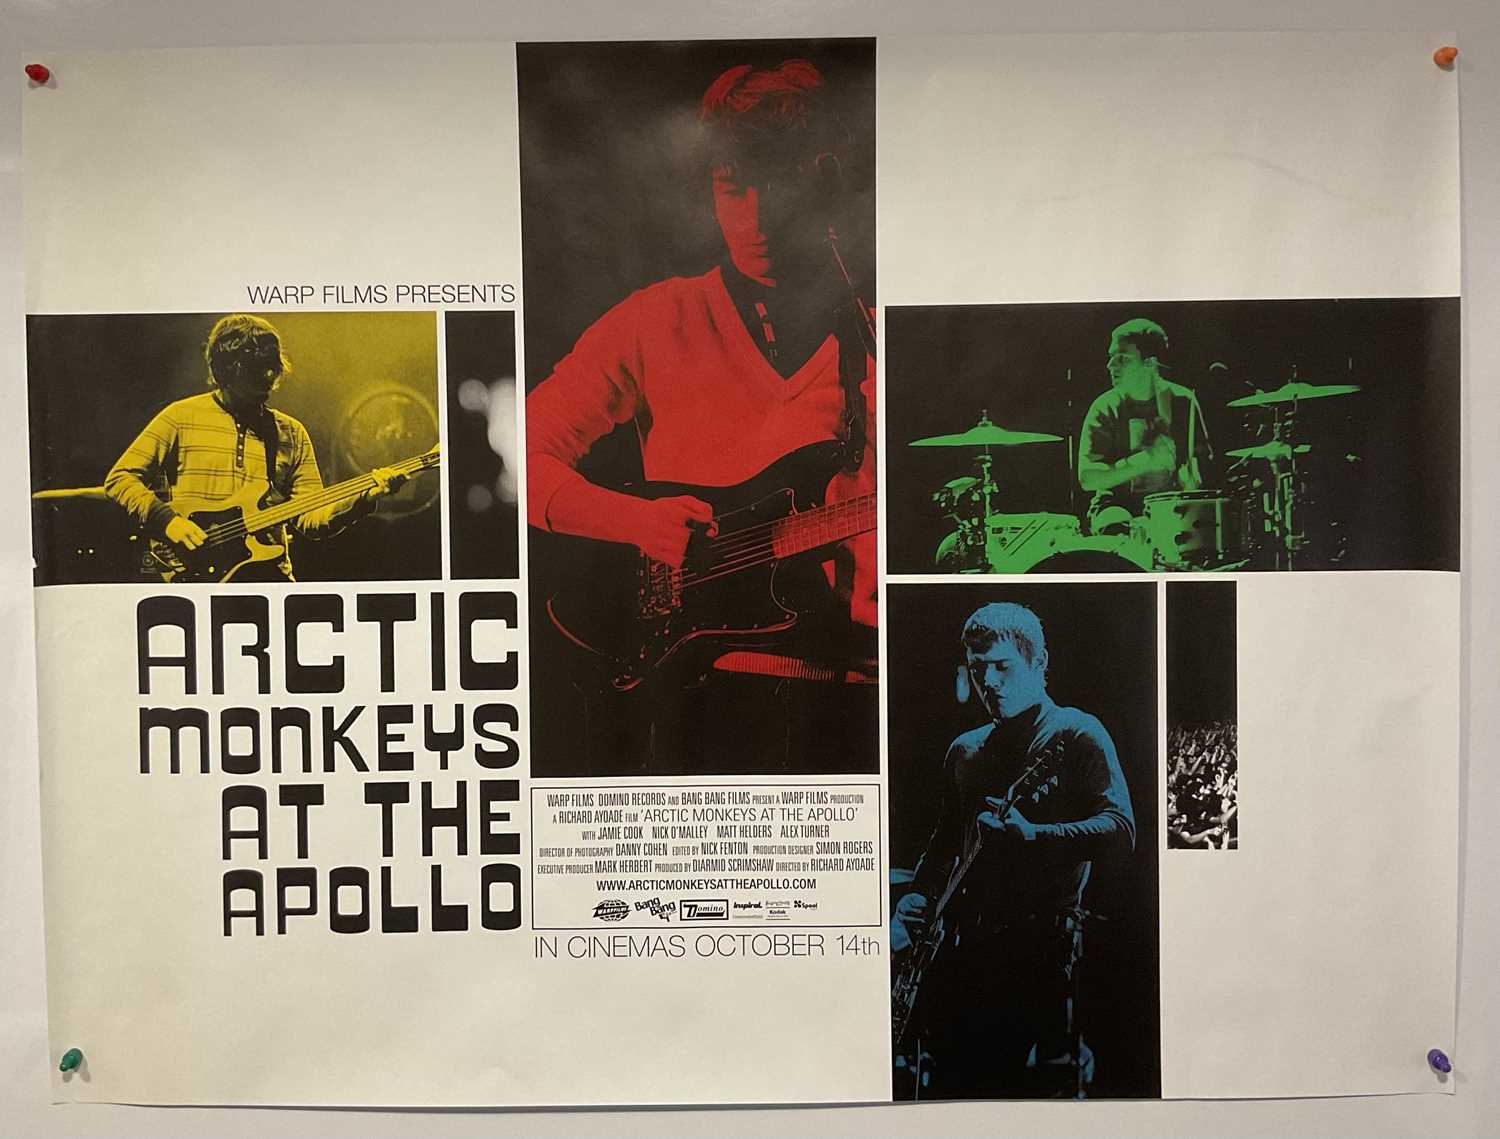 ARCTIC MONKEYS - A bus stop poster for the debut Arctic Monkeys album Whatever People Say I am, - Image 3 of 4